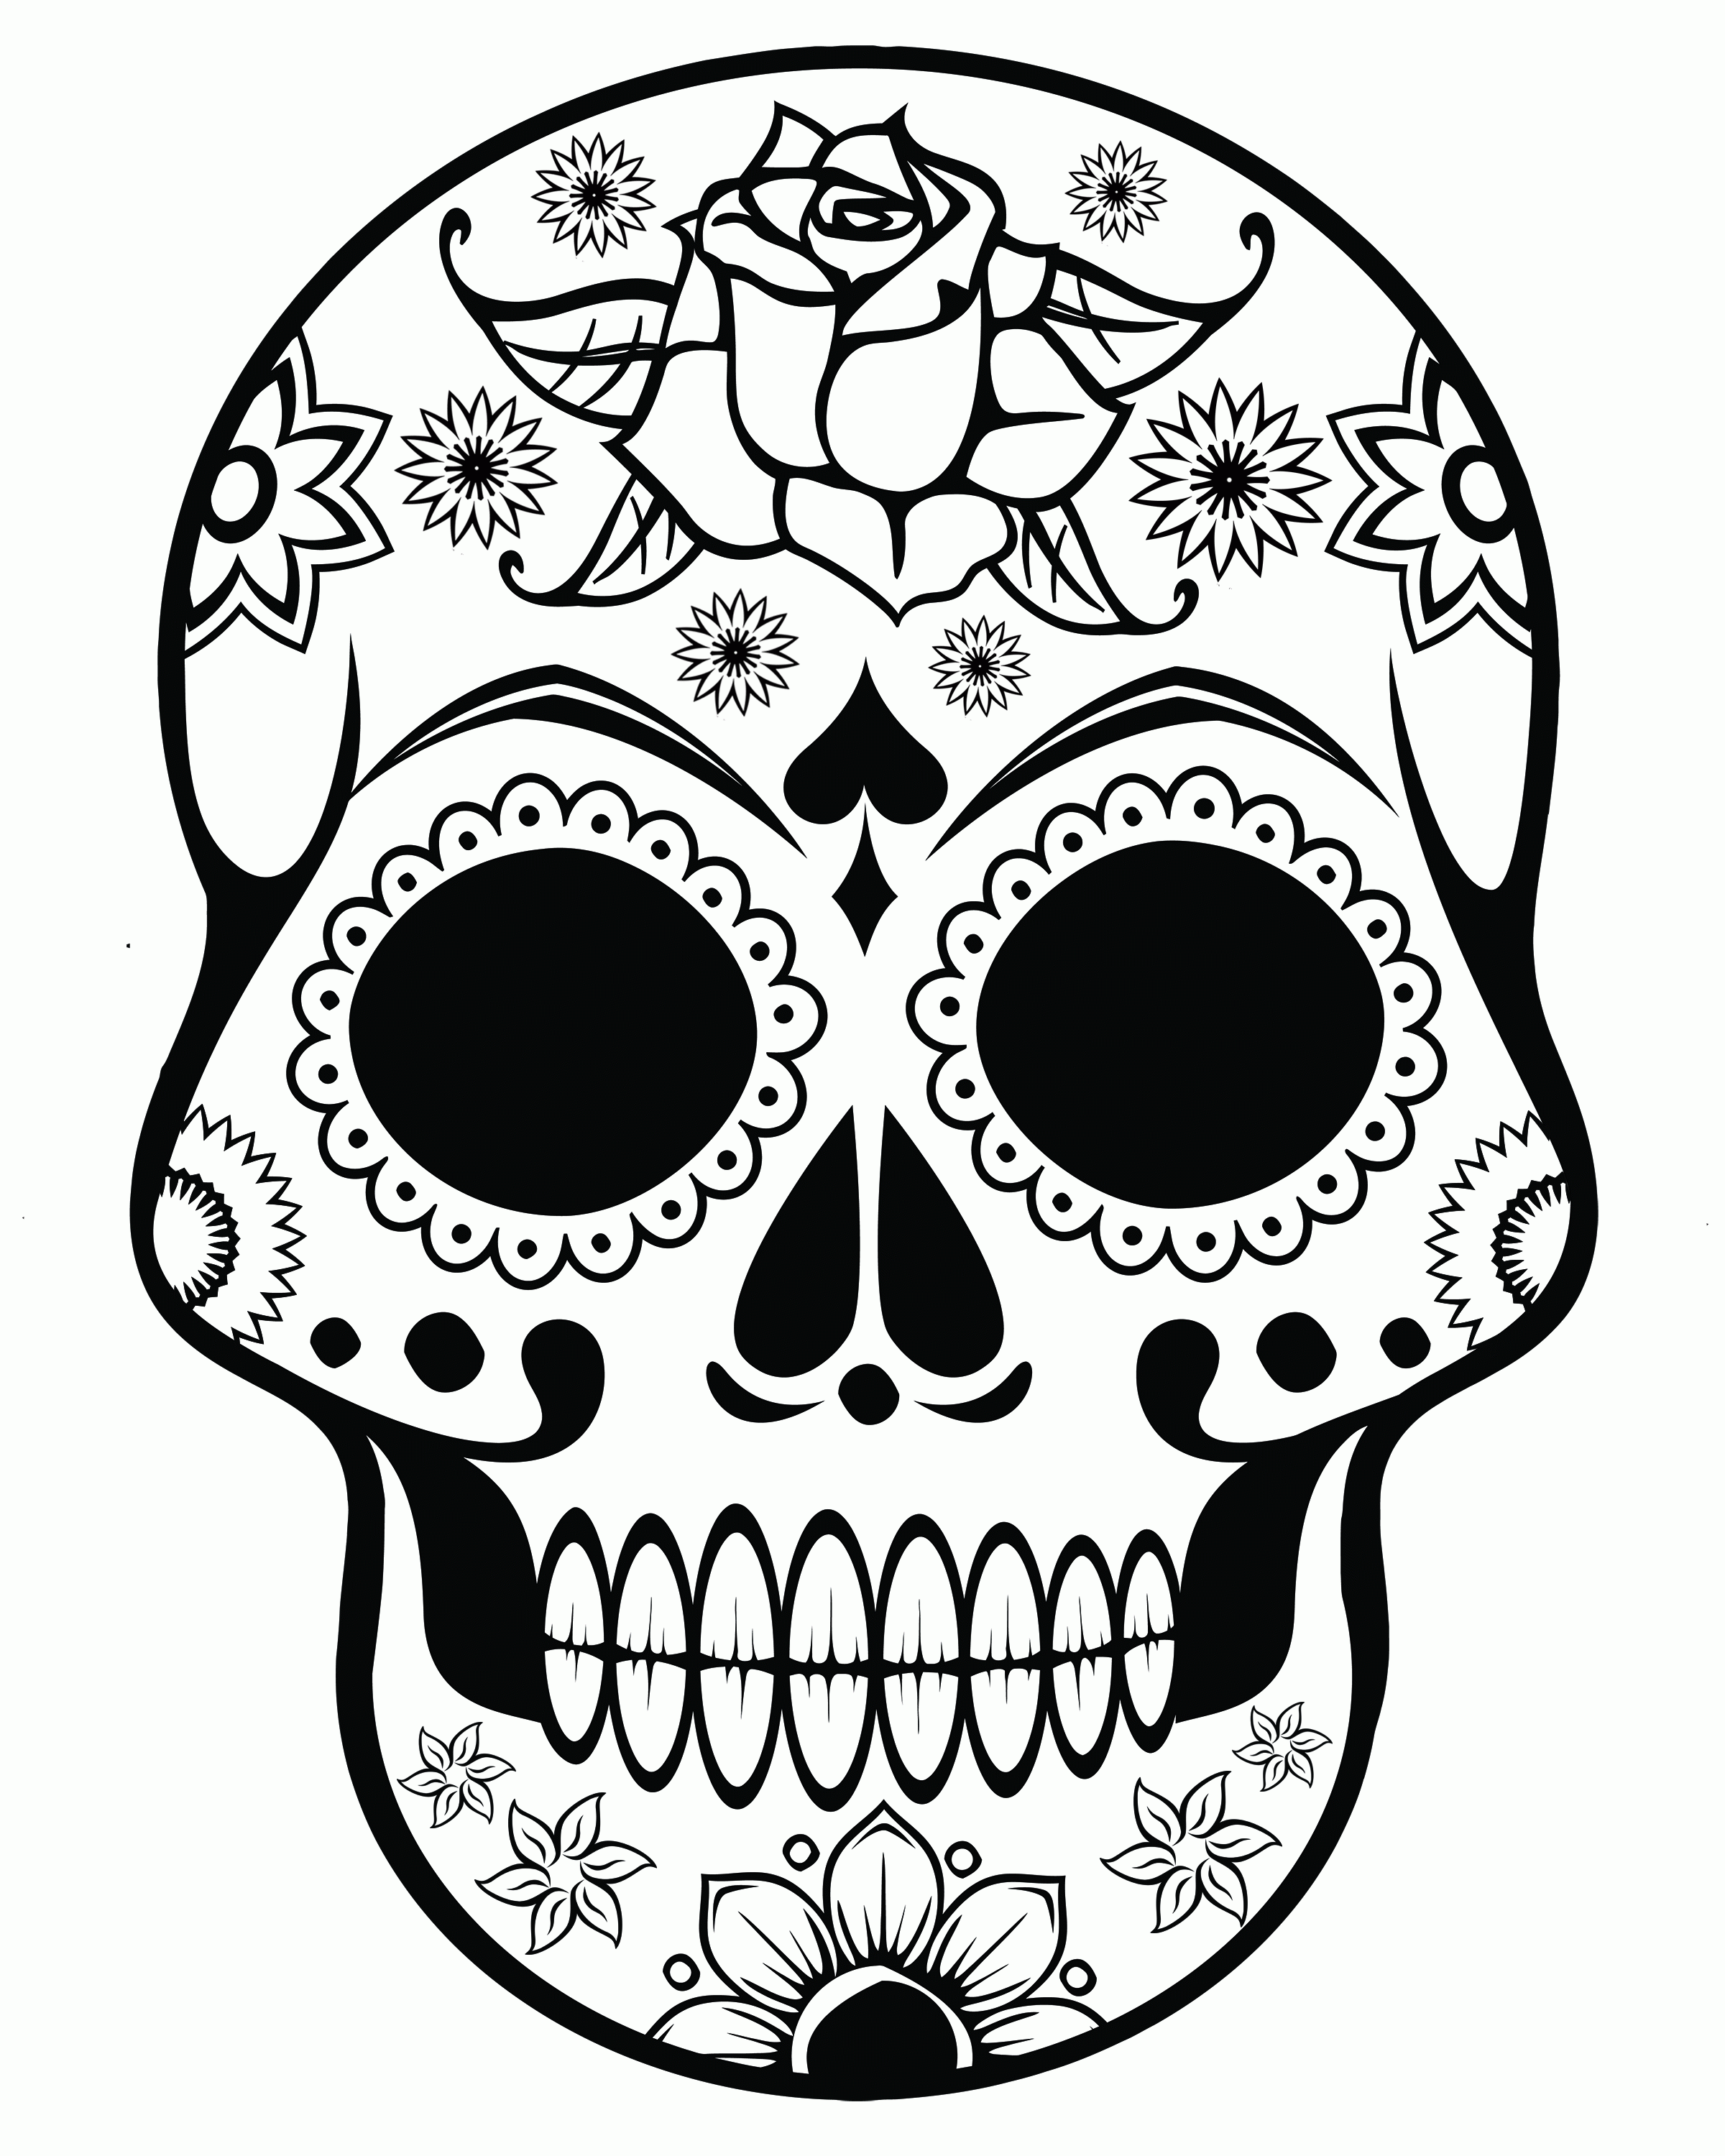 Skulls To Print - Coloring Pages for Kids and for Adults